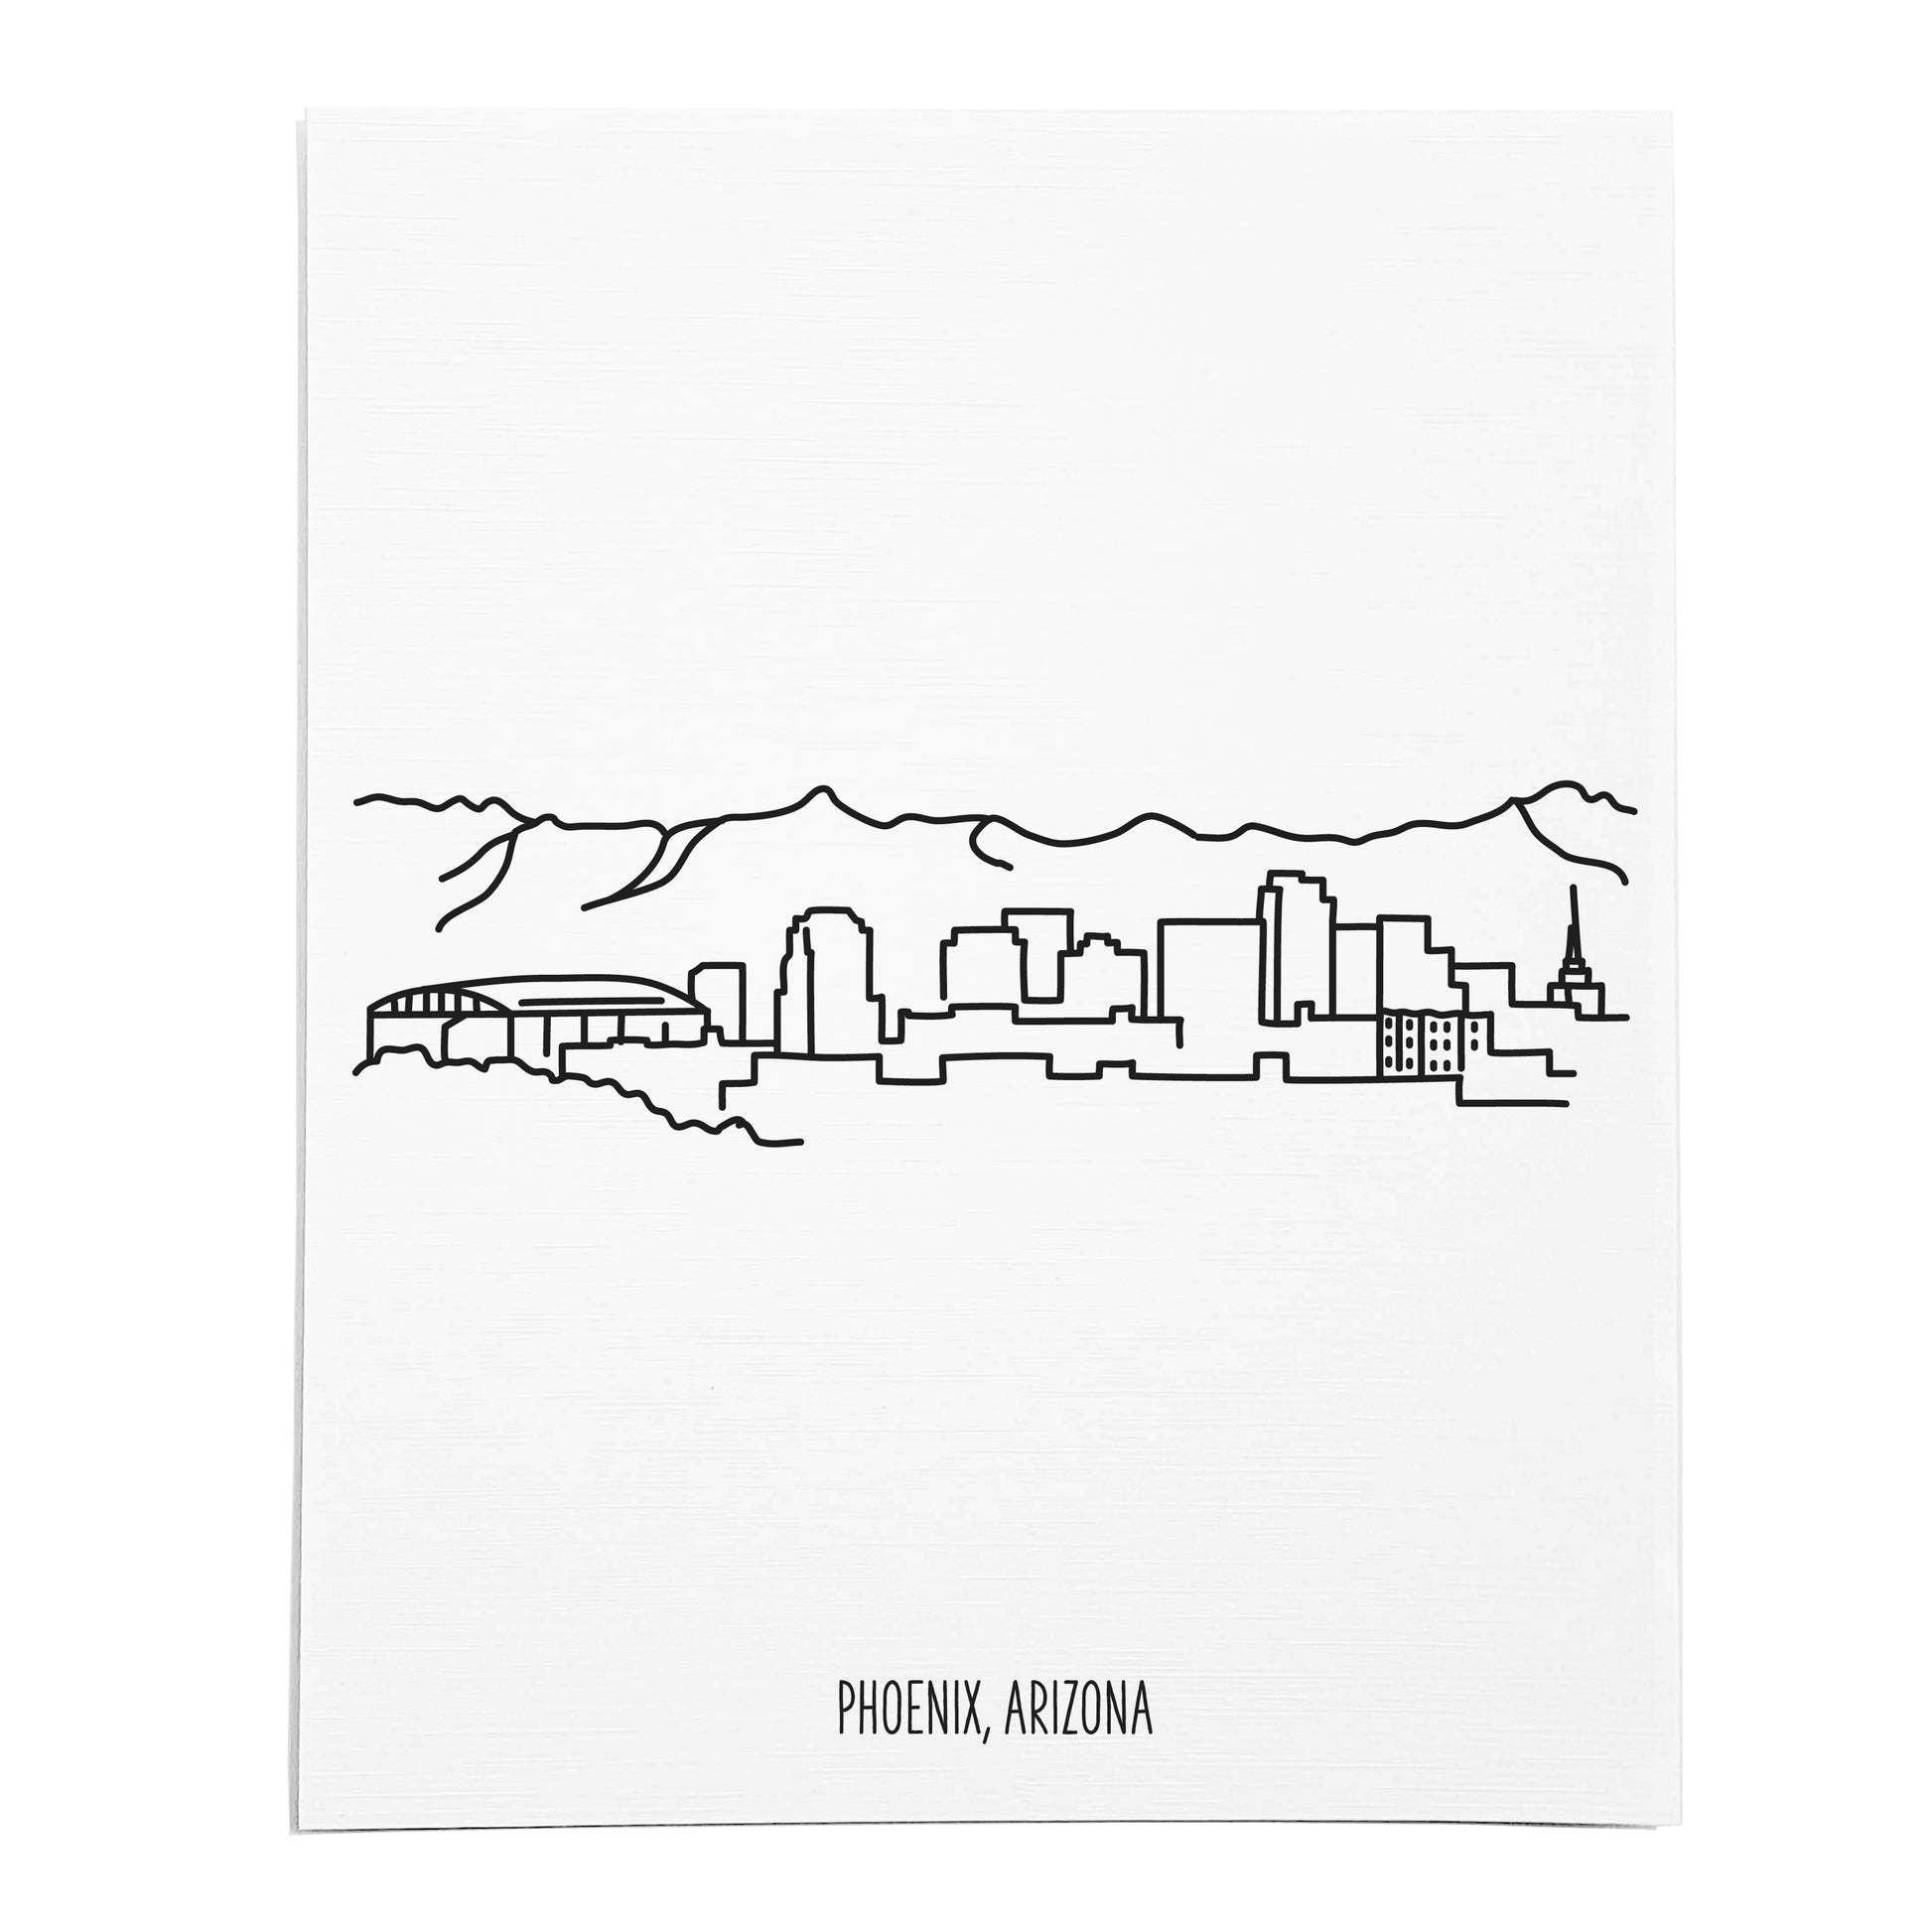 An art print featuring a line drawing of the Phoenix Skyline on white linen paper